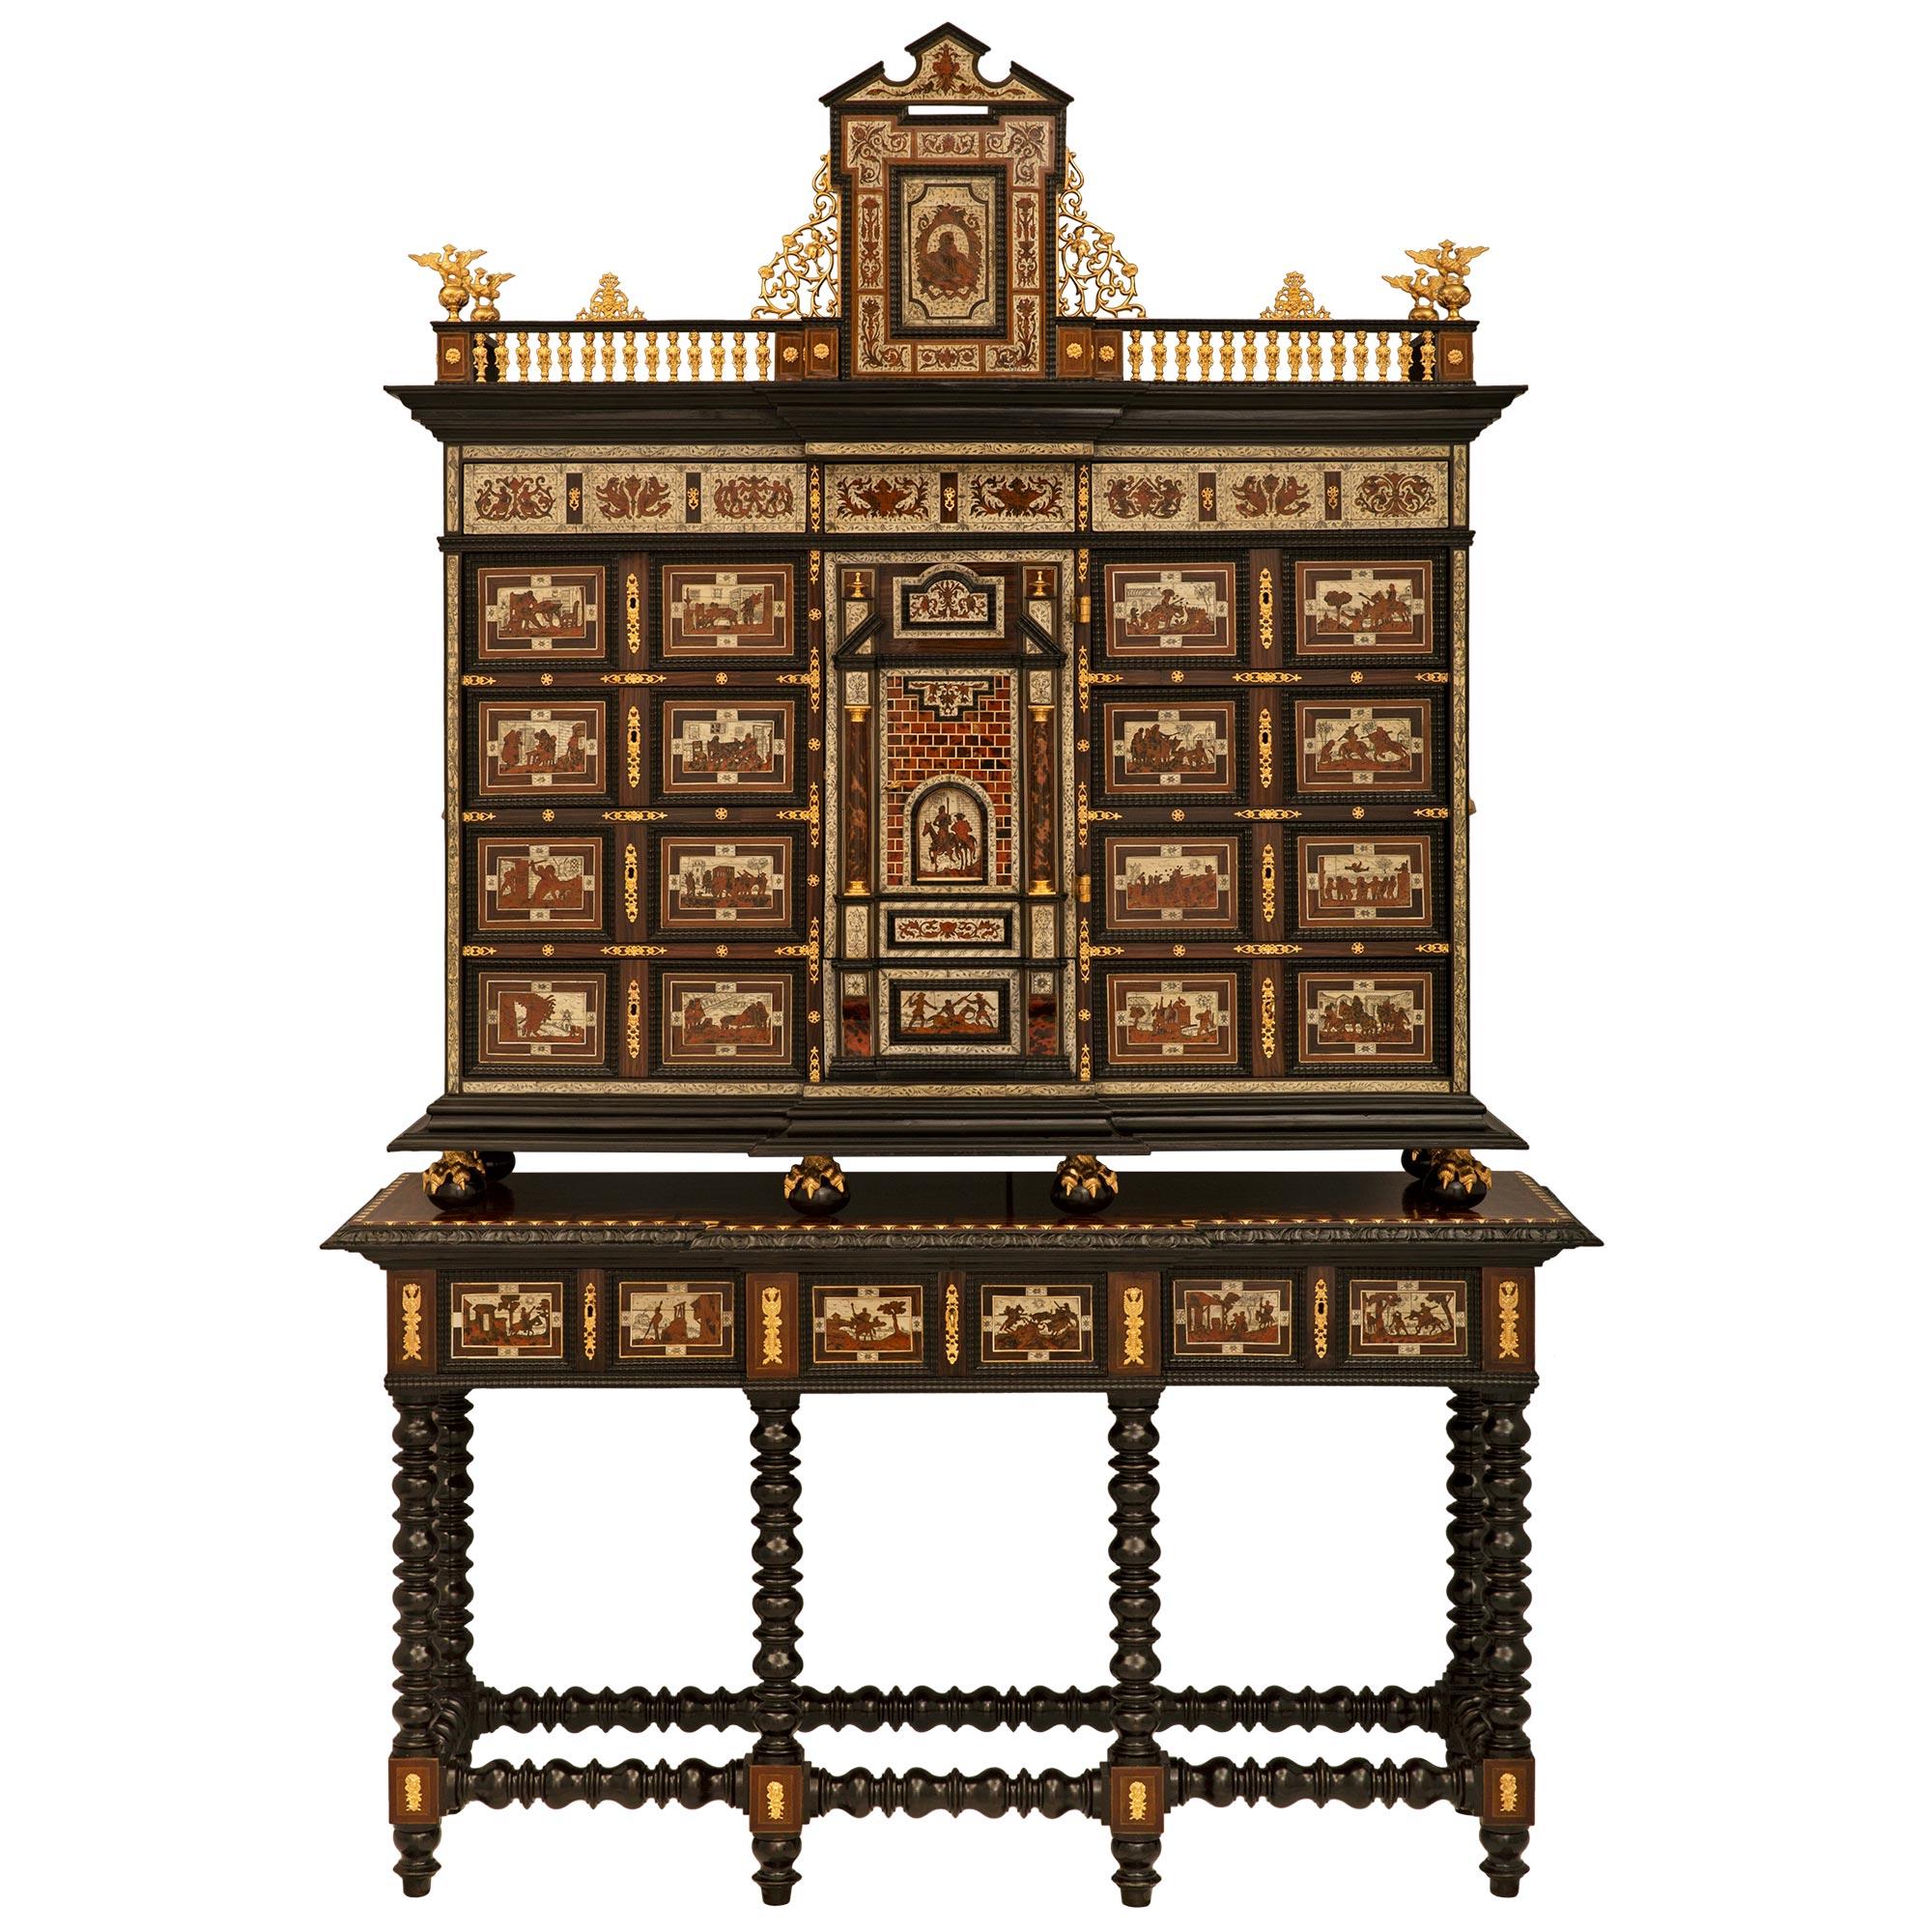 A spectacular and large scale Flemish early 19th century Rosewood, Mahogany, Ebony, ivory, Tortoiseshell and ormolu specimen cabinet. The fifteen drawer one door cabinet is raised by its original base with six exceptional most decorative turned legs